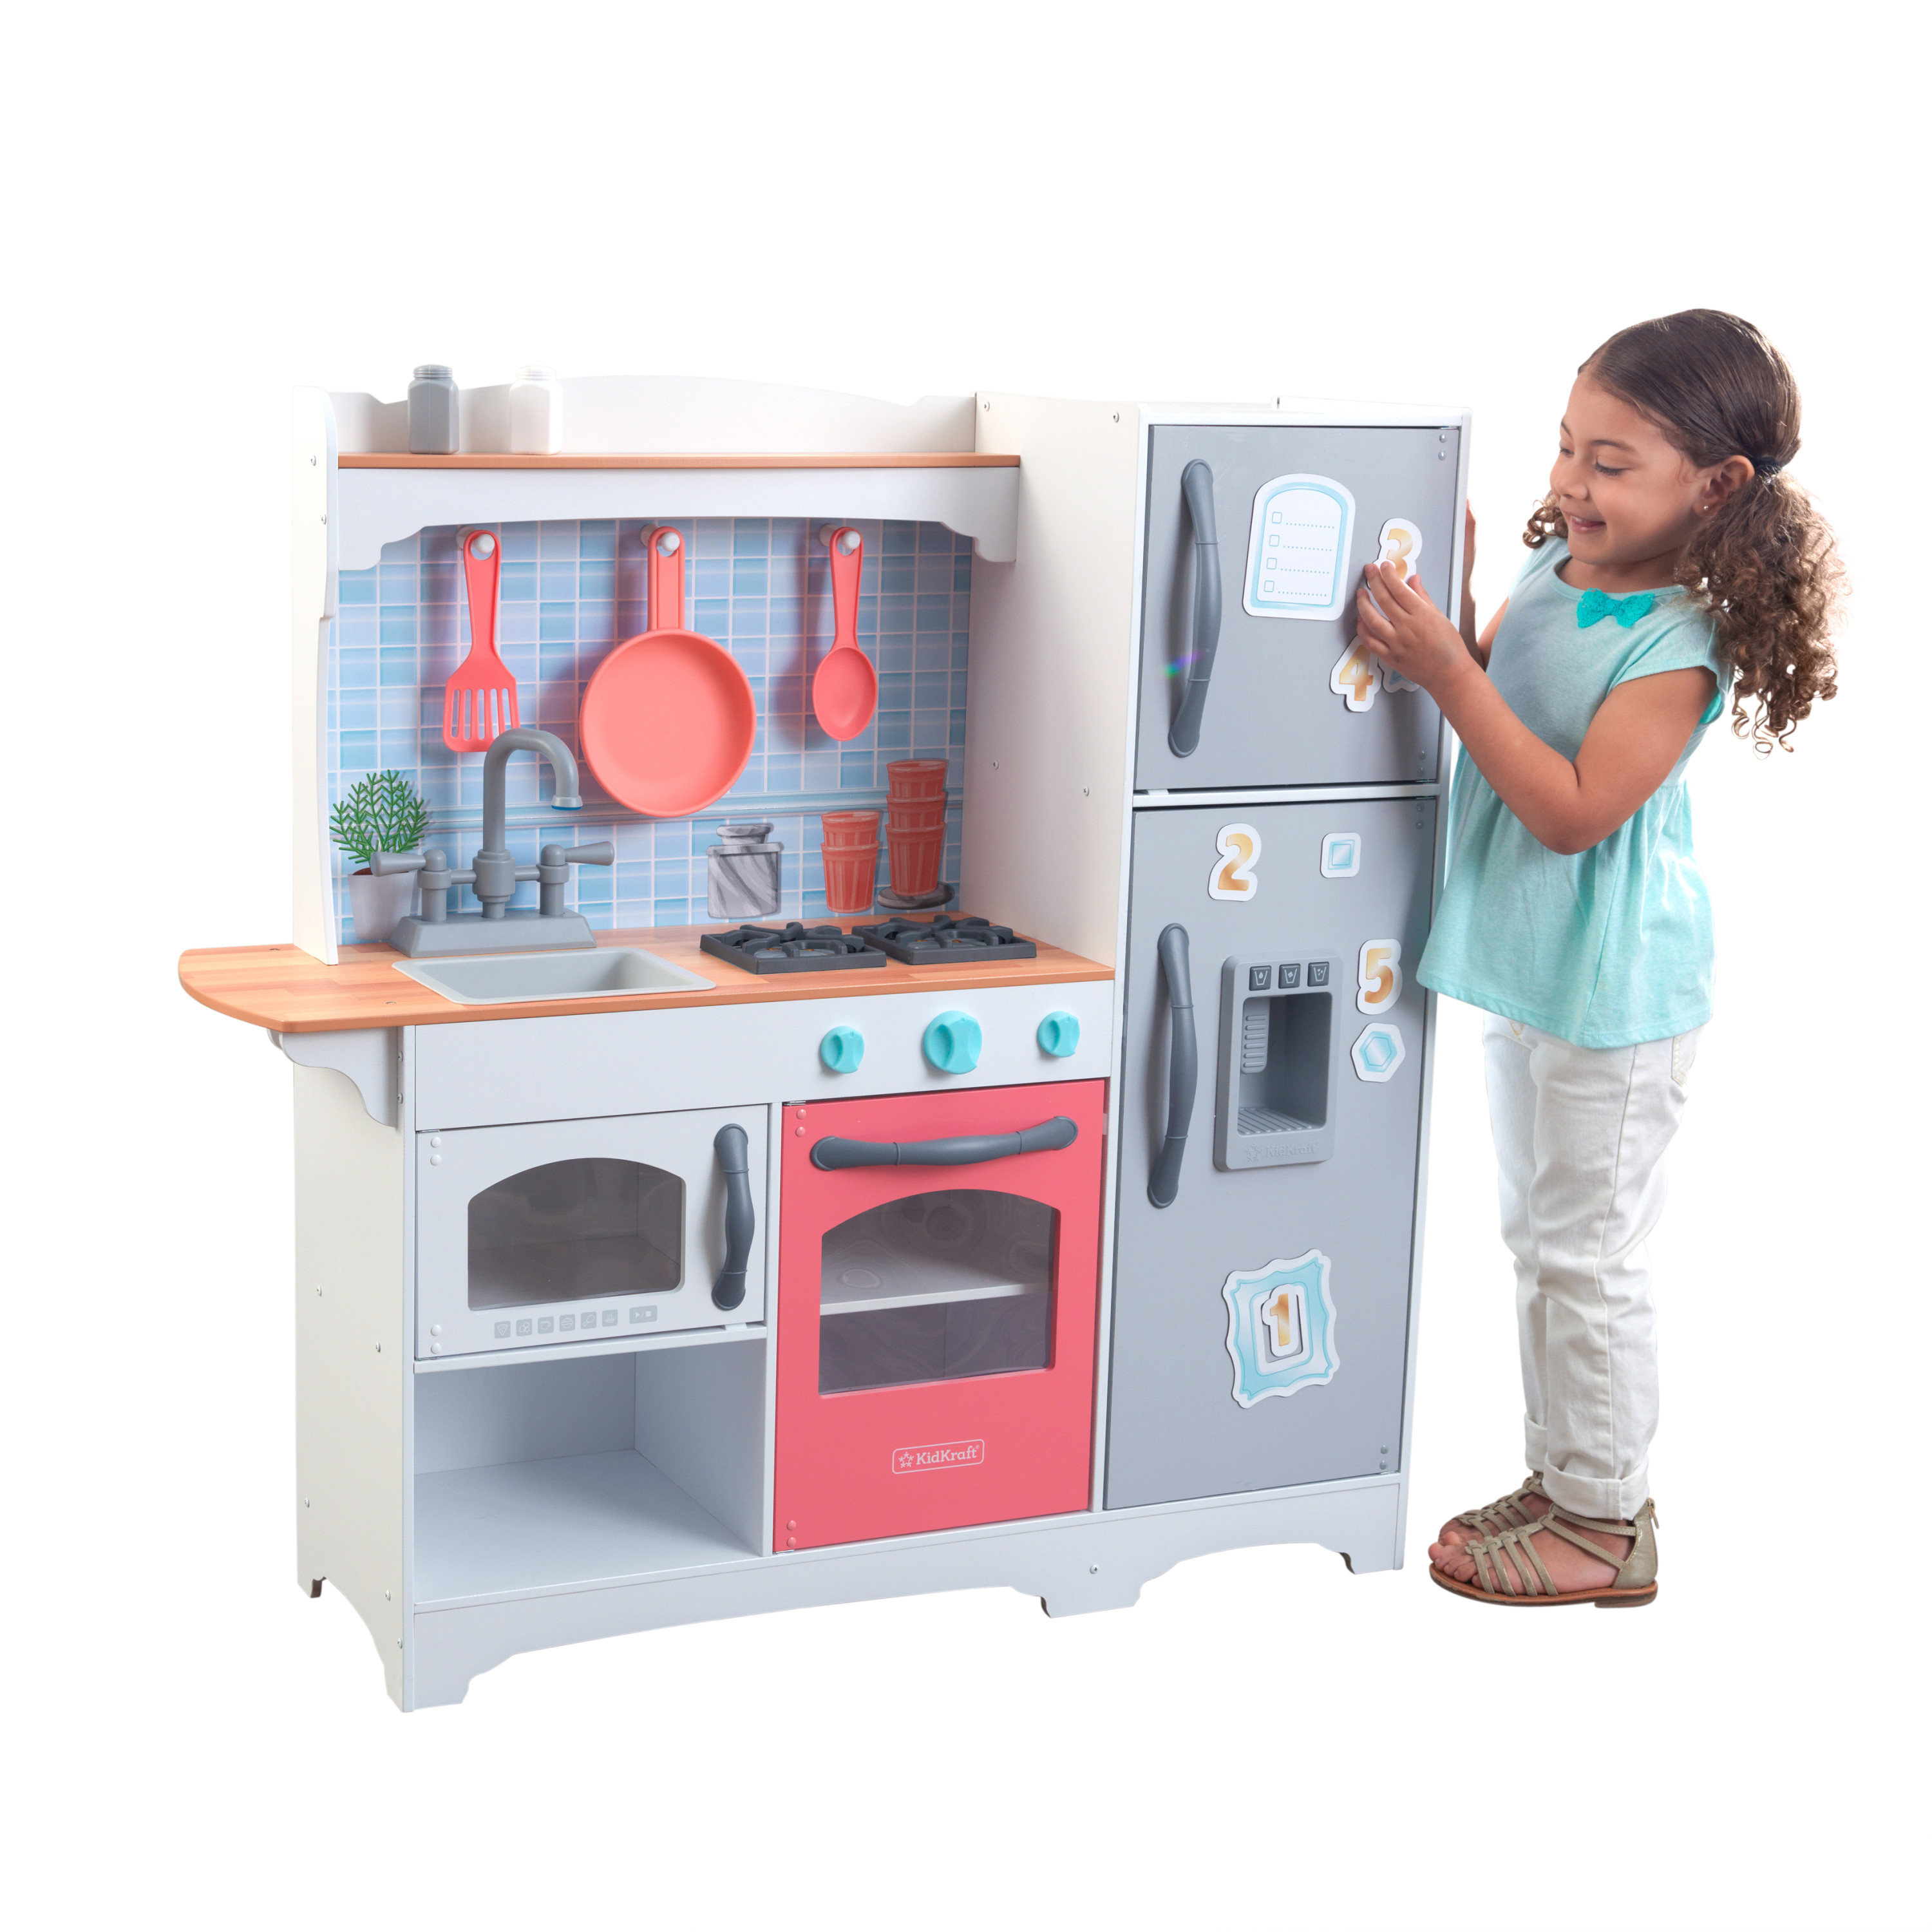 KidKraft Mosaic Magnetic Play Kitchen for Kids, Gray and Pink - image 4 of 12